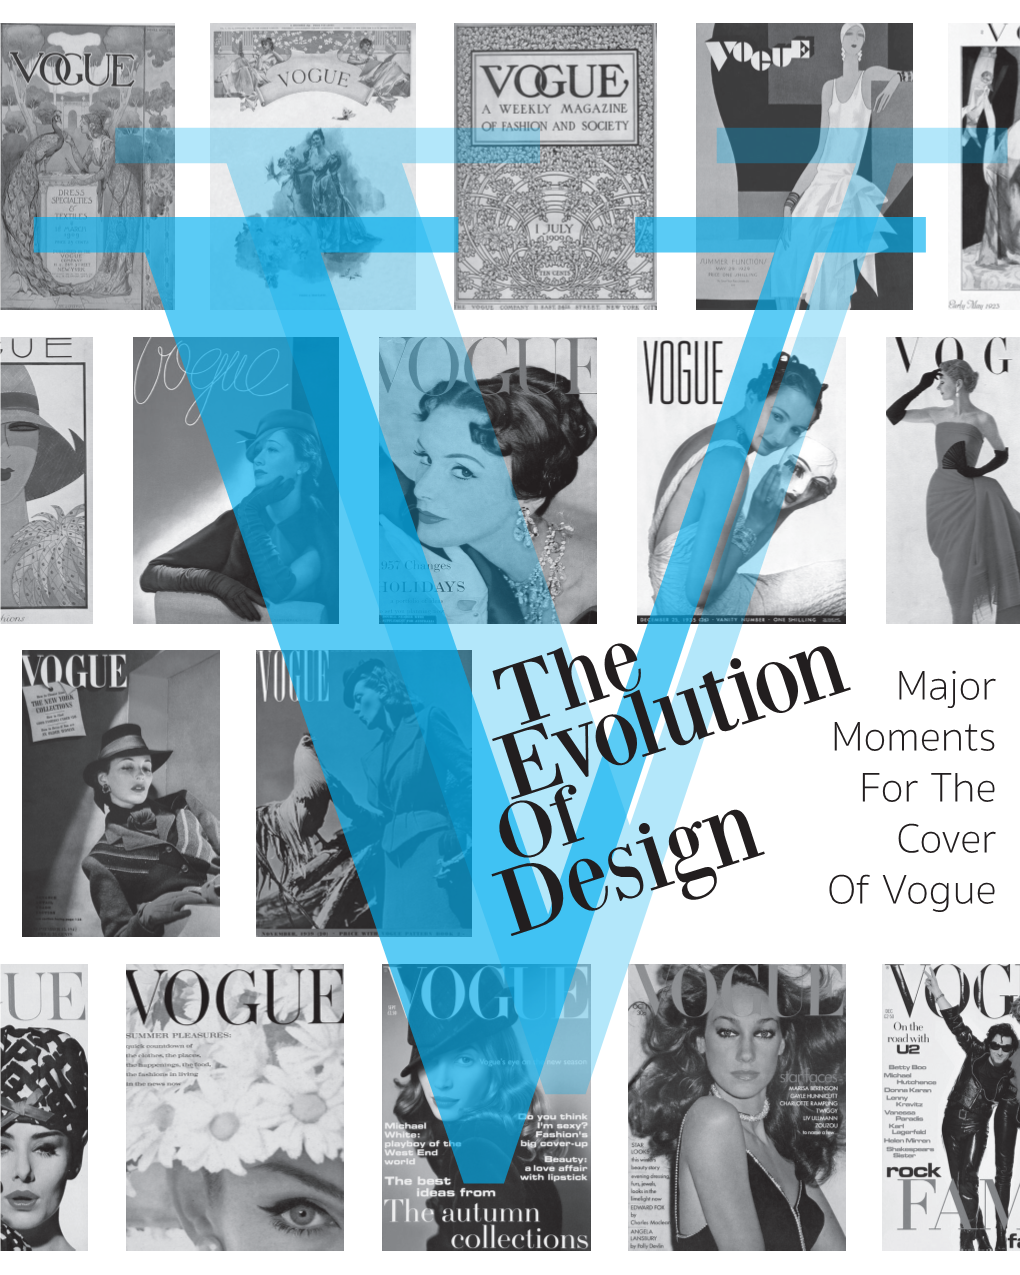 Design of Vogue Ogue, by Its Very Namesake, Must Live up to Hearty Expectations to Stay at the Forefront of Fashion a Round the World for Over a Century